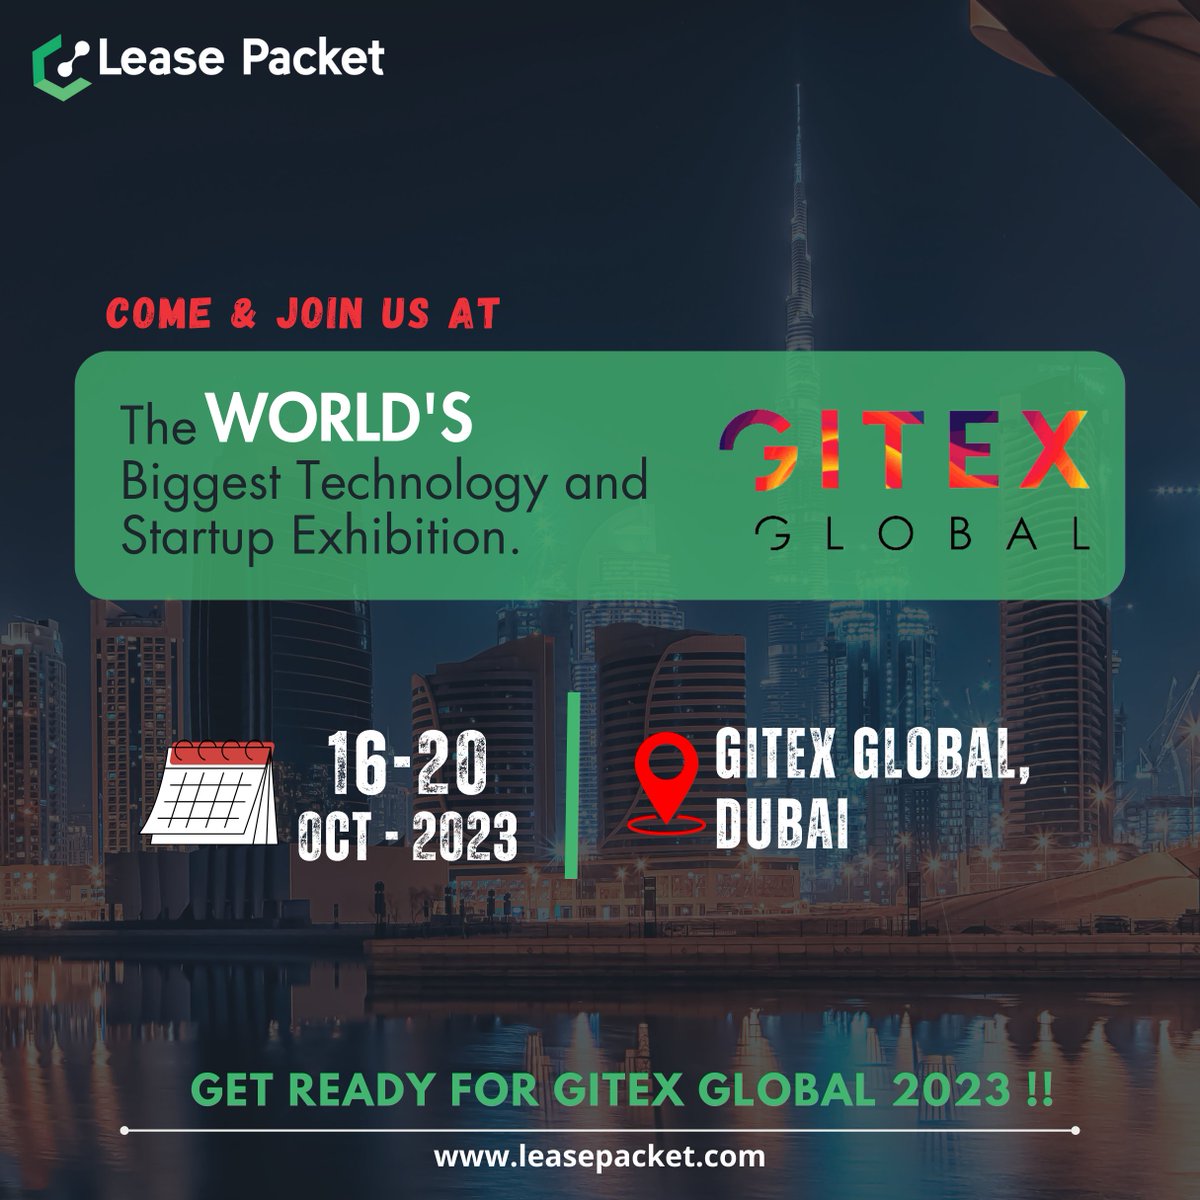 Explore the future of technology with us at GITEX Technology Week. We would love to meet you. 
📍Venue: - Gitex Global,Dubai
📷Dates: - 16-20 0ctober - 2023
#leasepacket #gitex2023dubai #gitexglobal #gitex #dubaievents #gitextechnologyweek #gitexdubai #globaldevslam